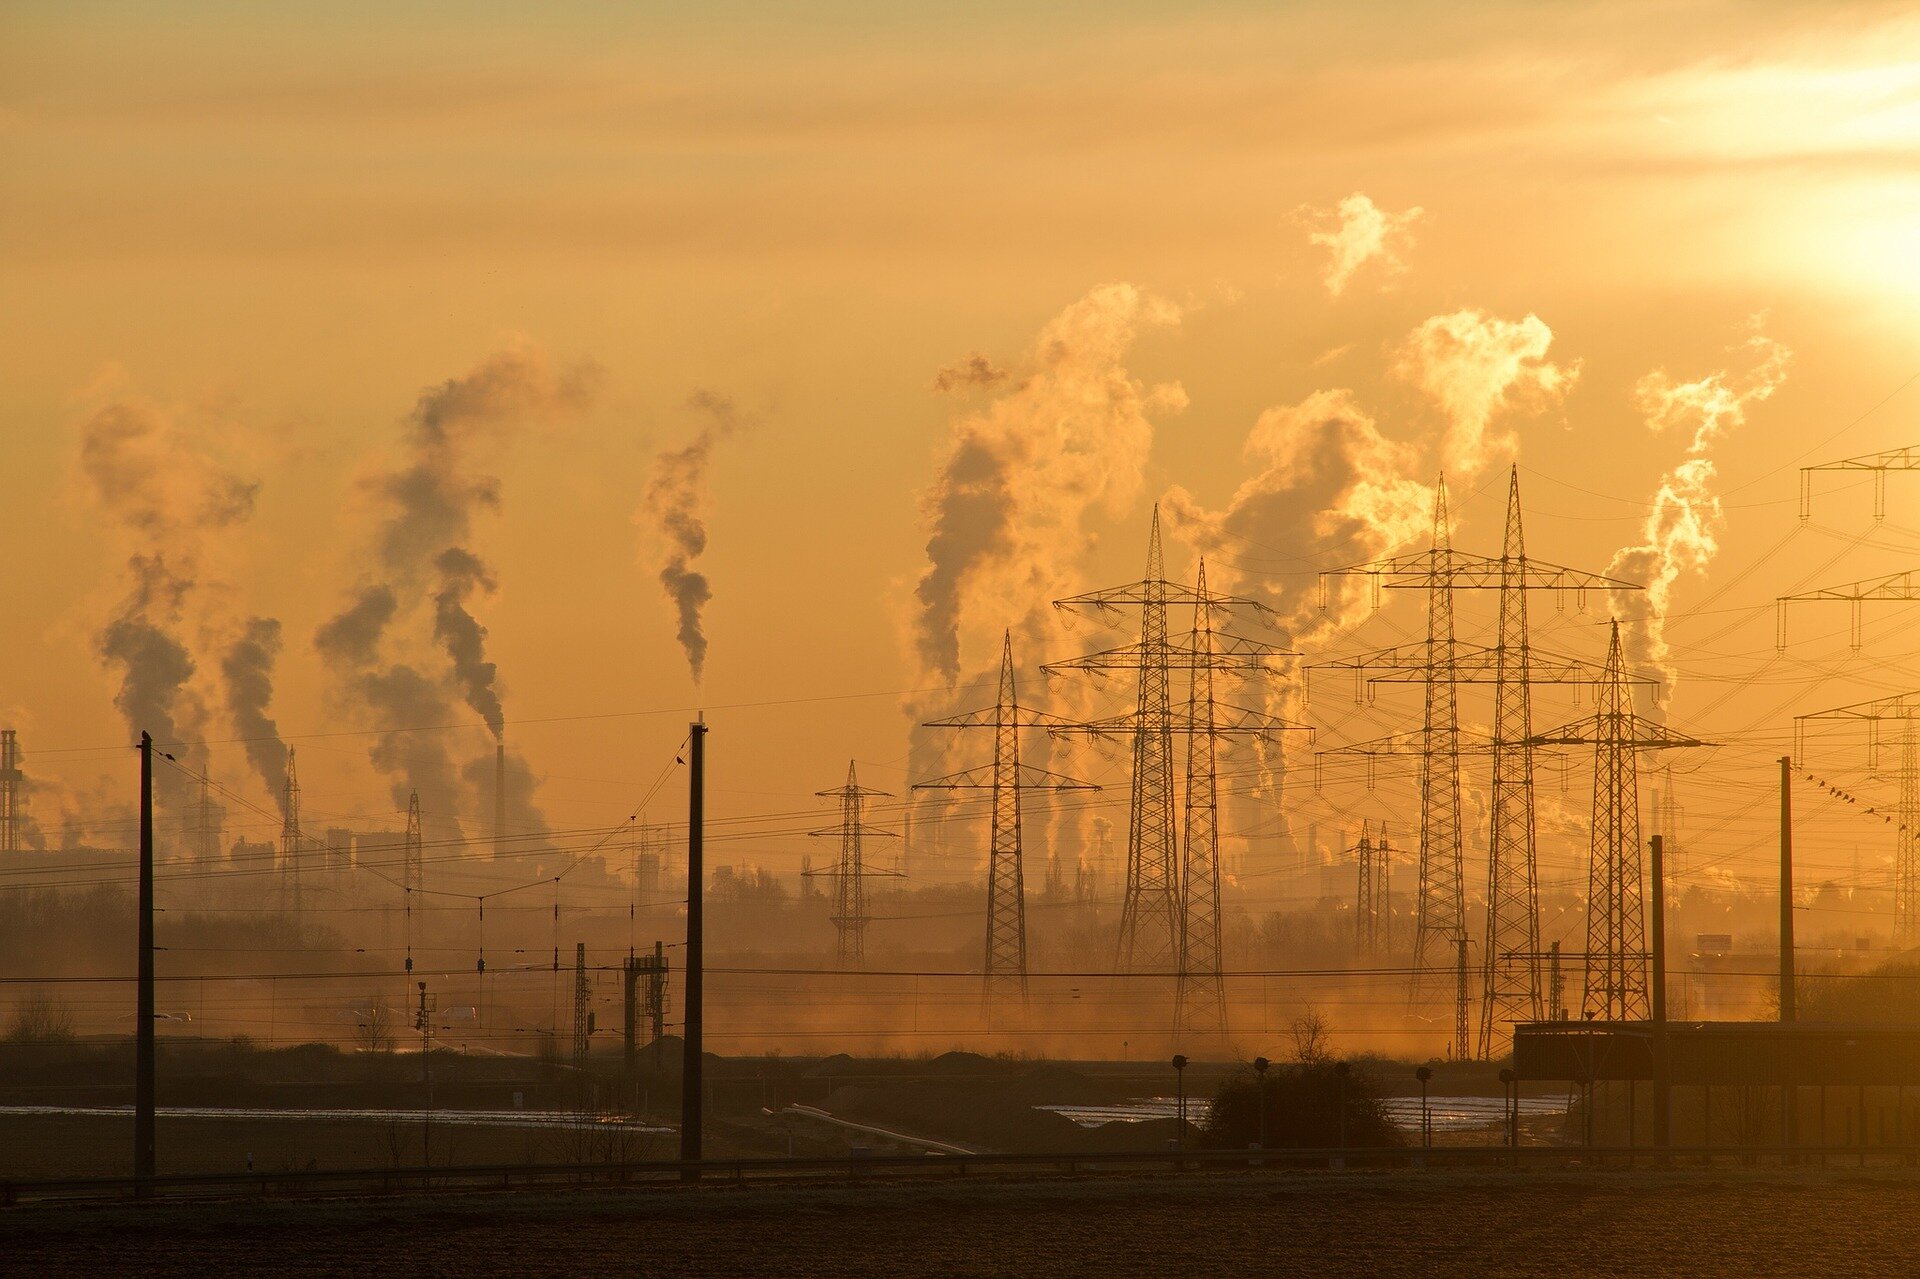 Government policies work to reduce greenhouse gas emissions, analysis finds